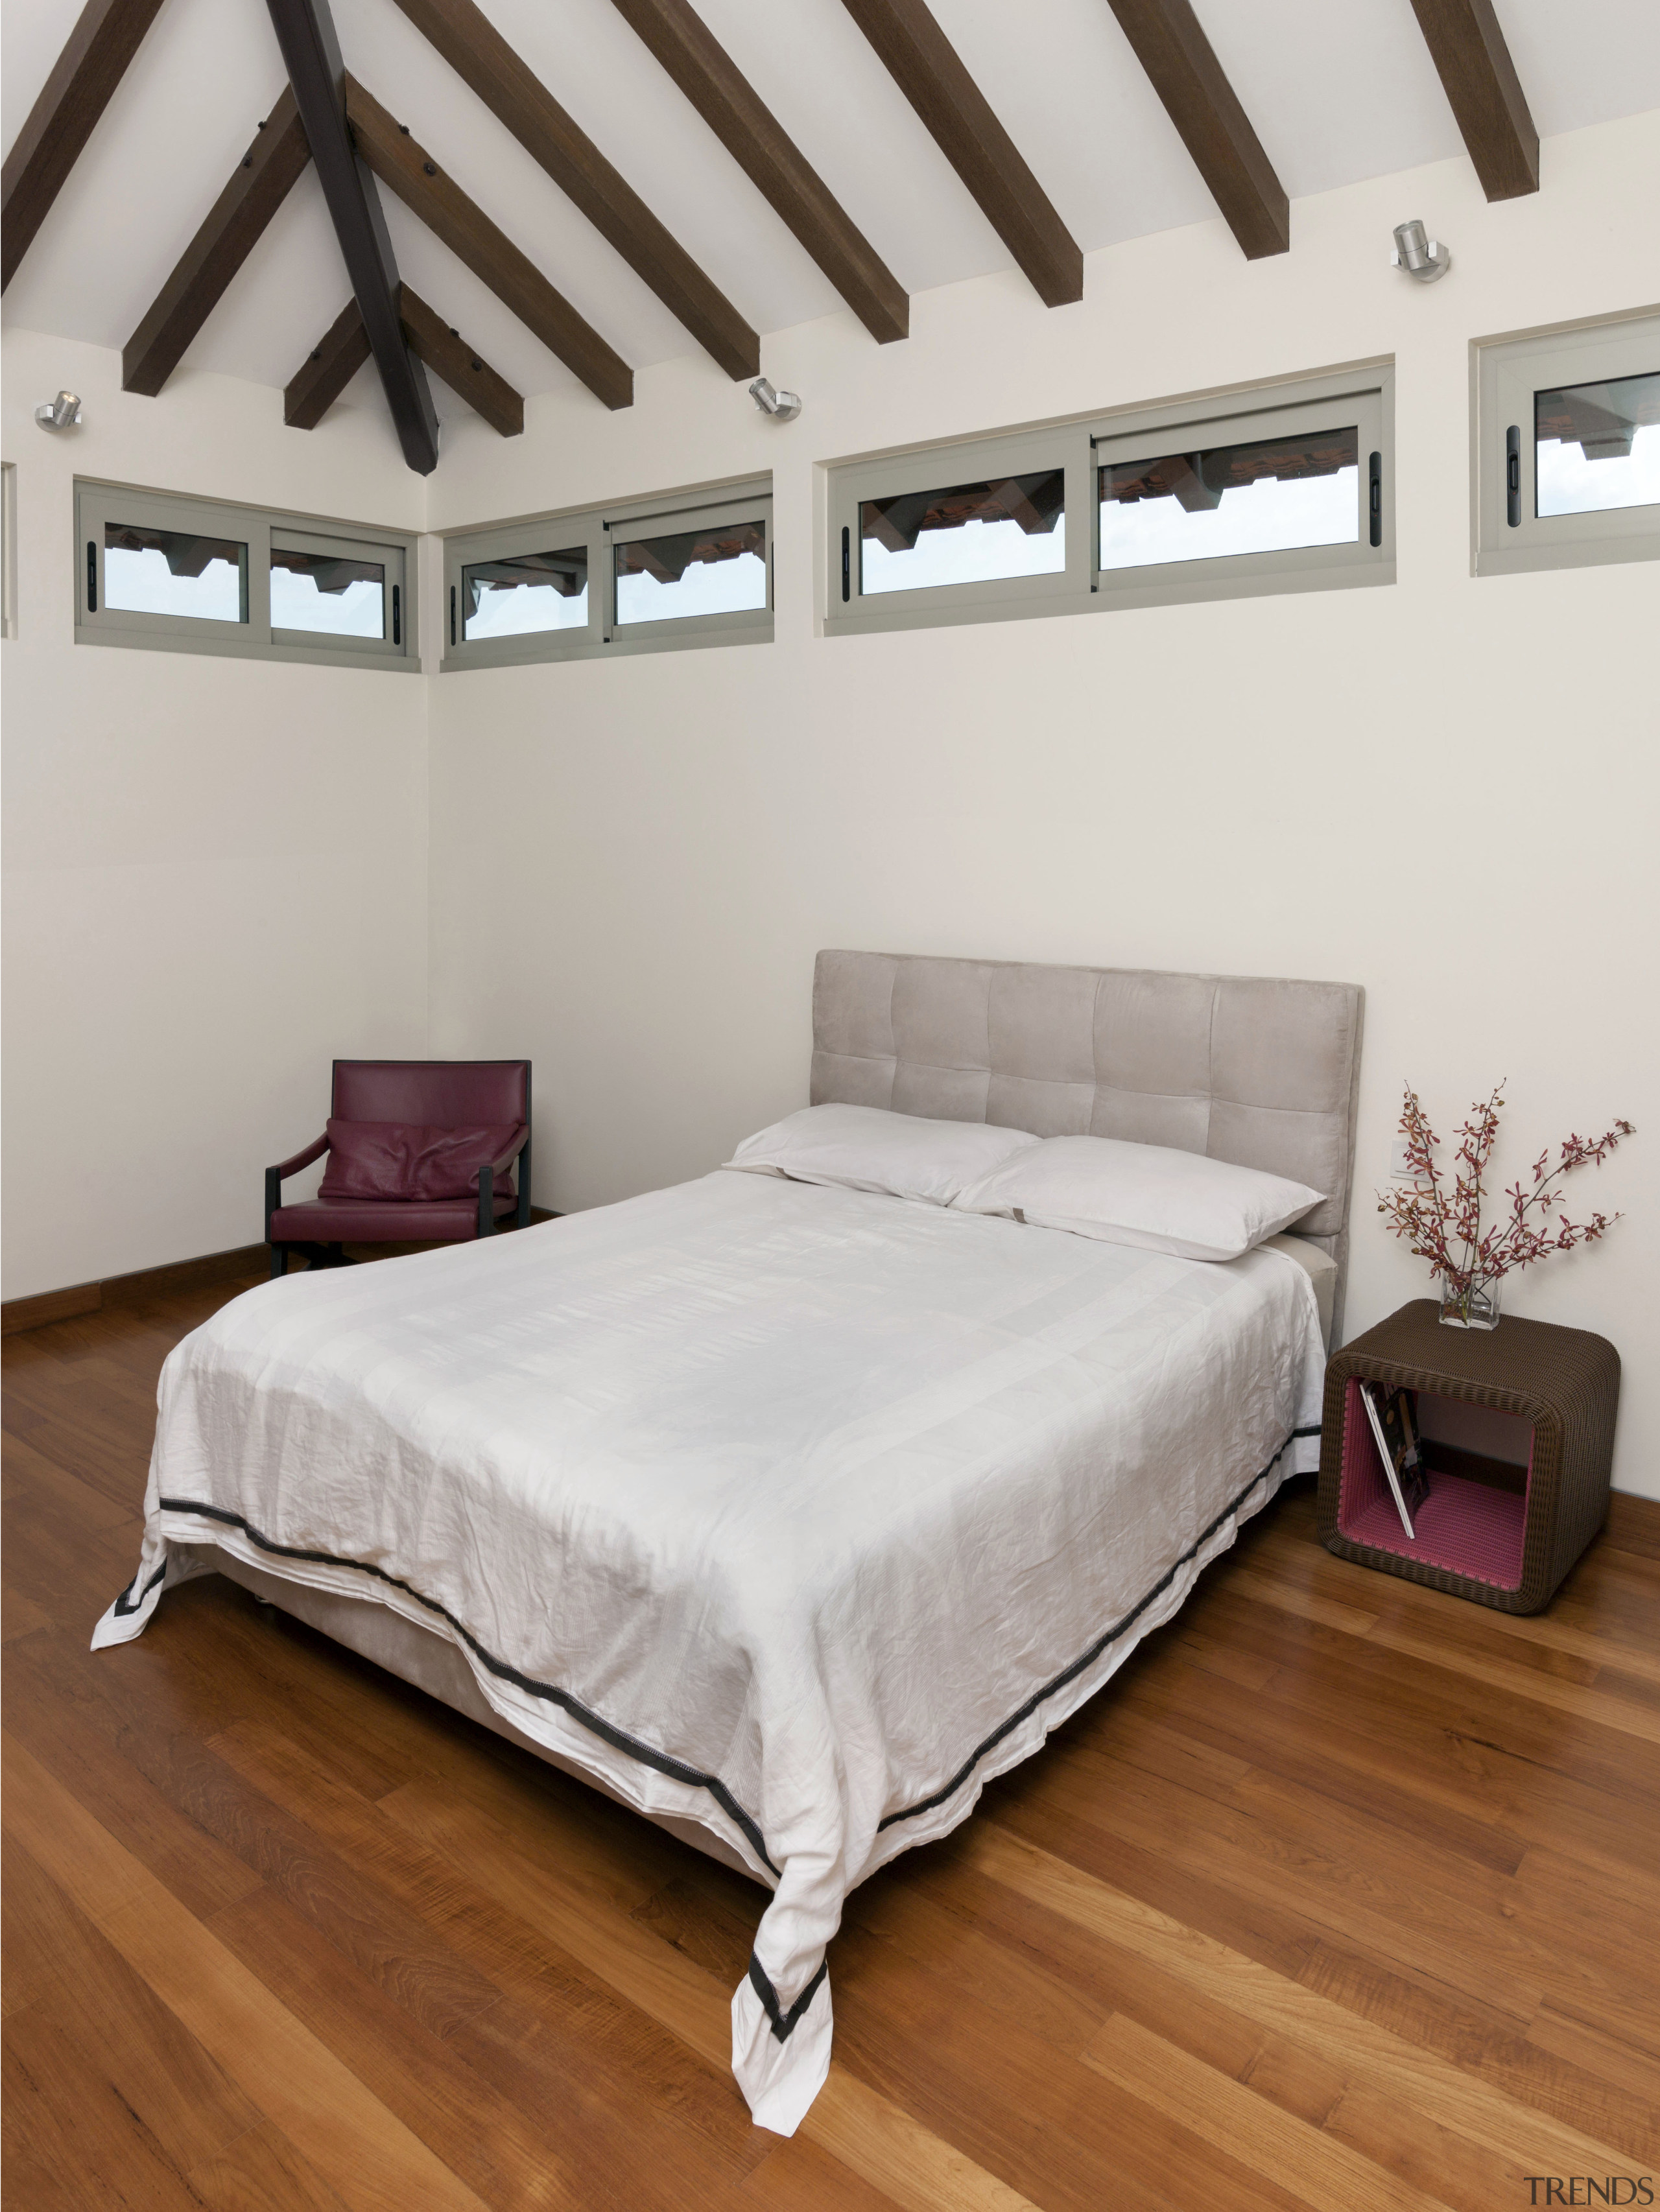 Contemporary tropical asia bedroom - Contemporary tropical asia bed, bed frame, bed sheet, bedroom, ceiling, floor, furniture, home, mattress, real estate, wood, gray, brown